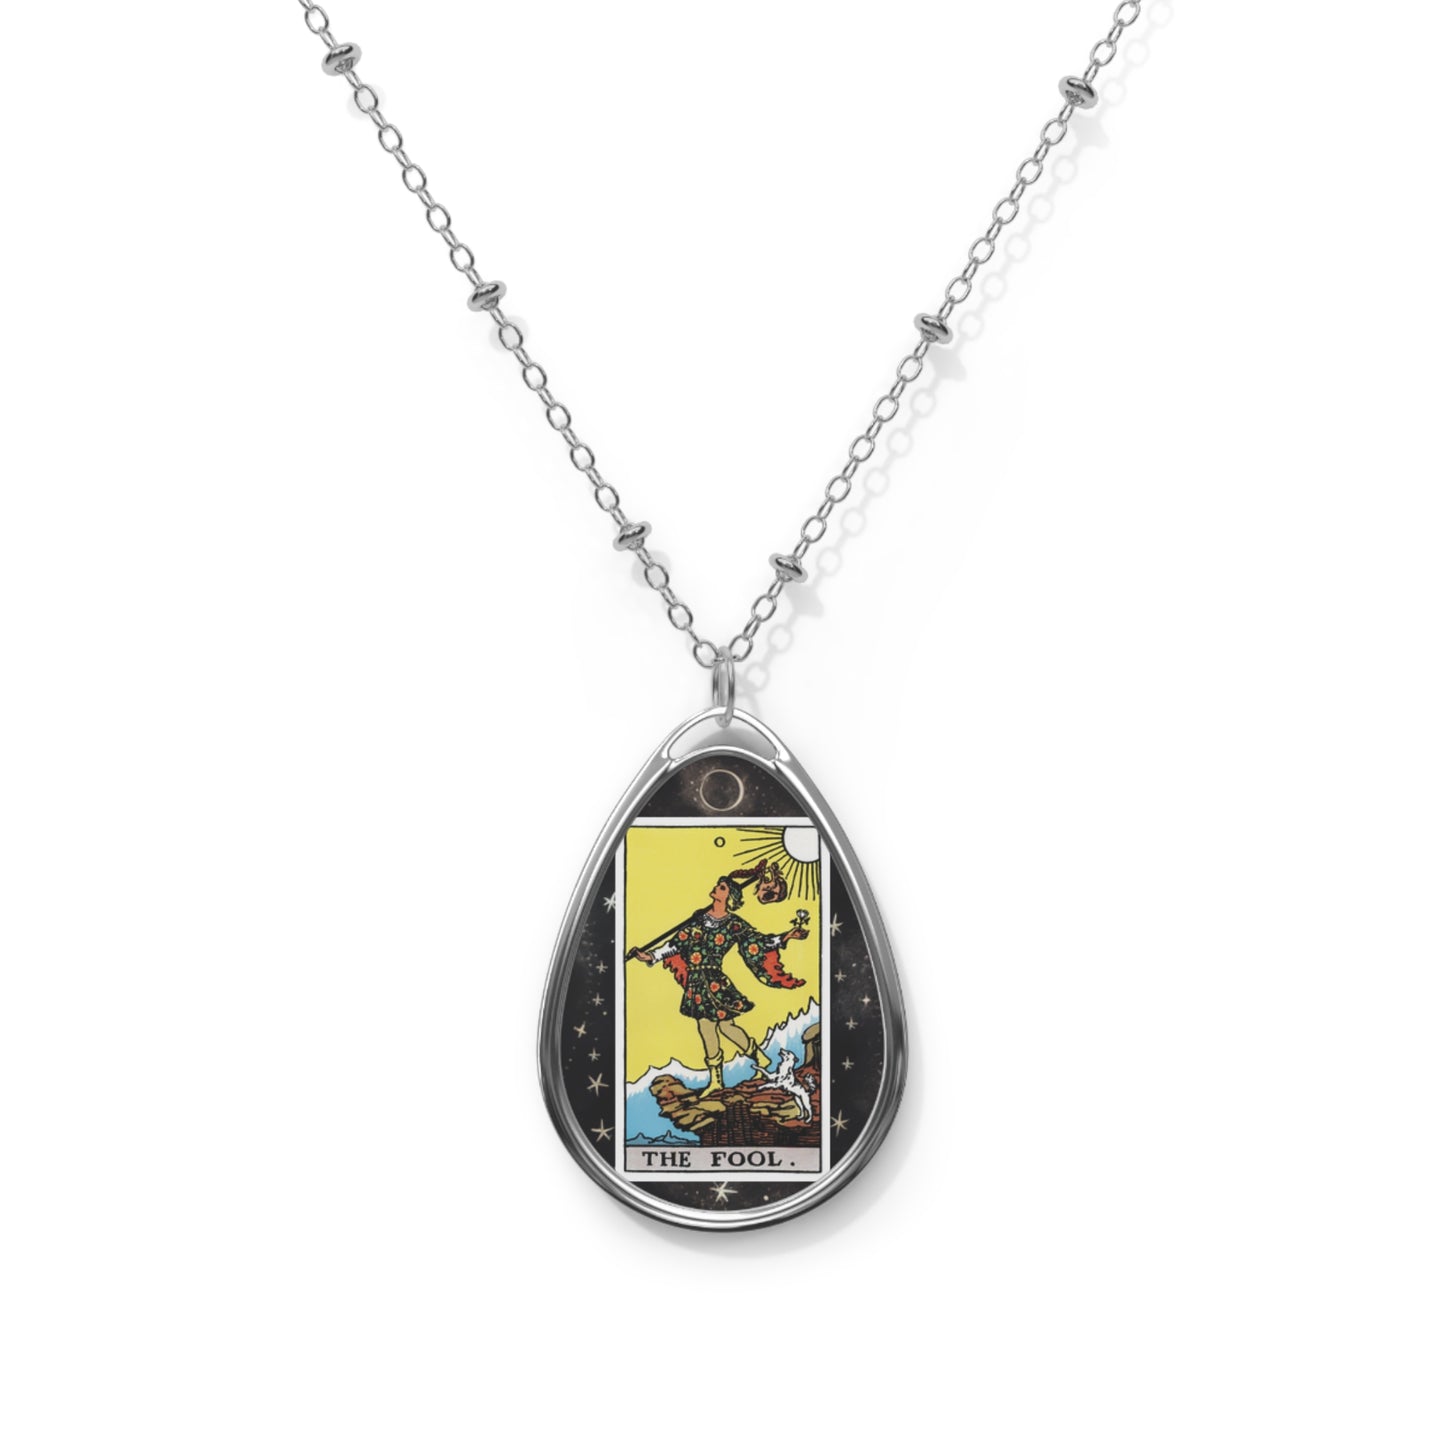 The Fool Tarot Card Oval Pendant Necklace With Chain